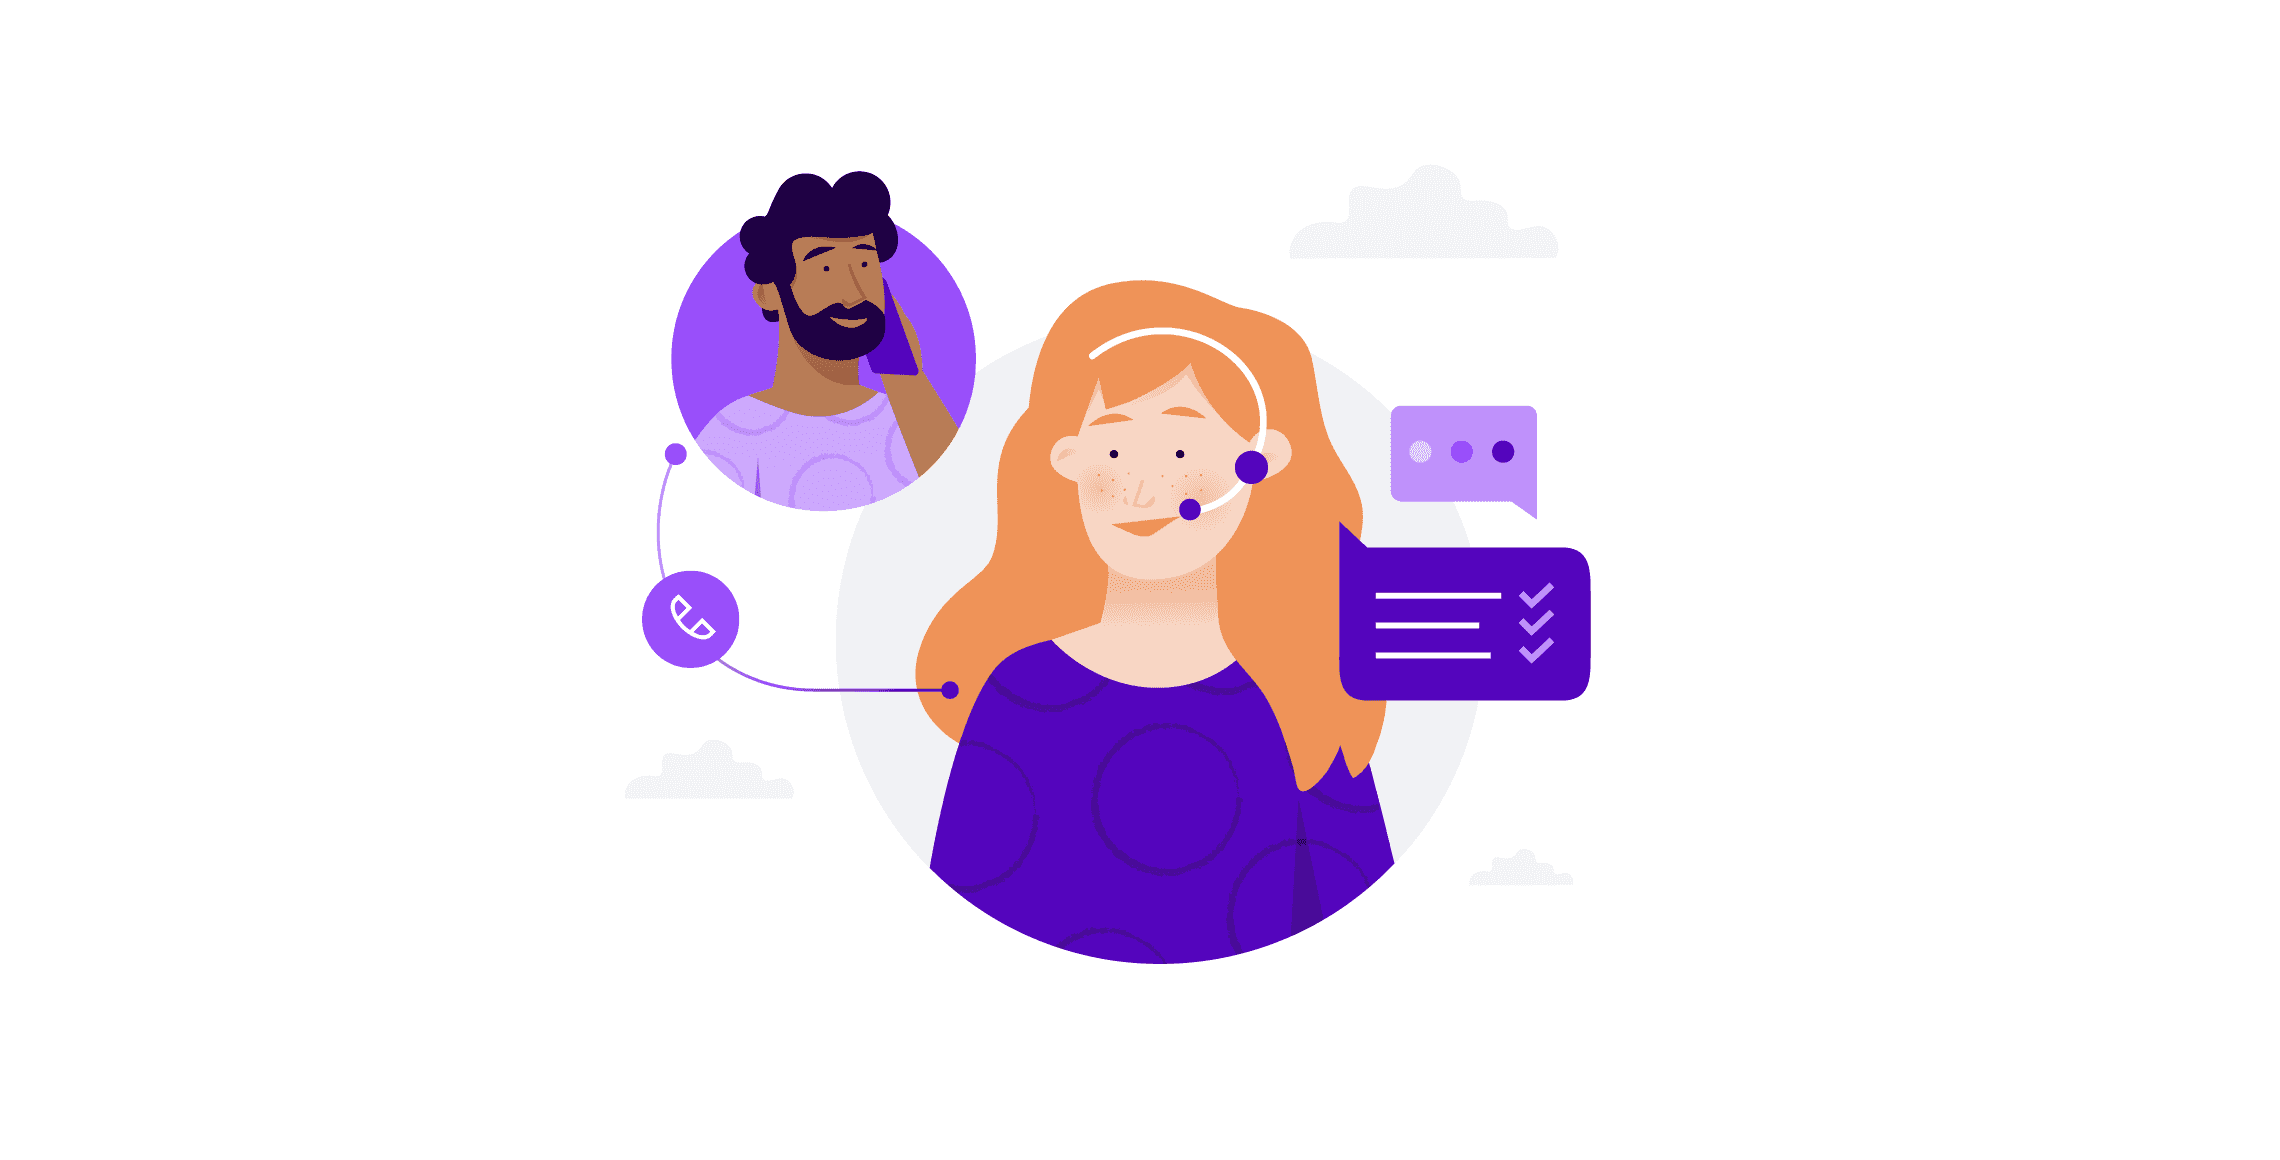 Illustration of a female customer service agent talking with a customer through the phone